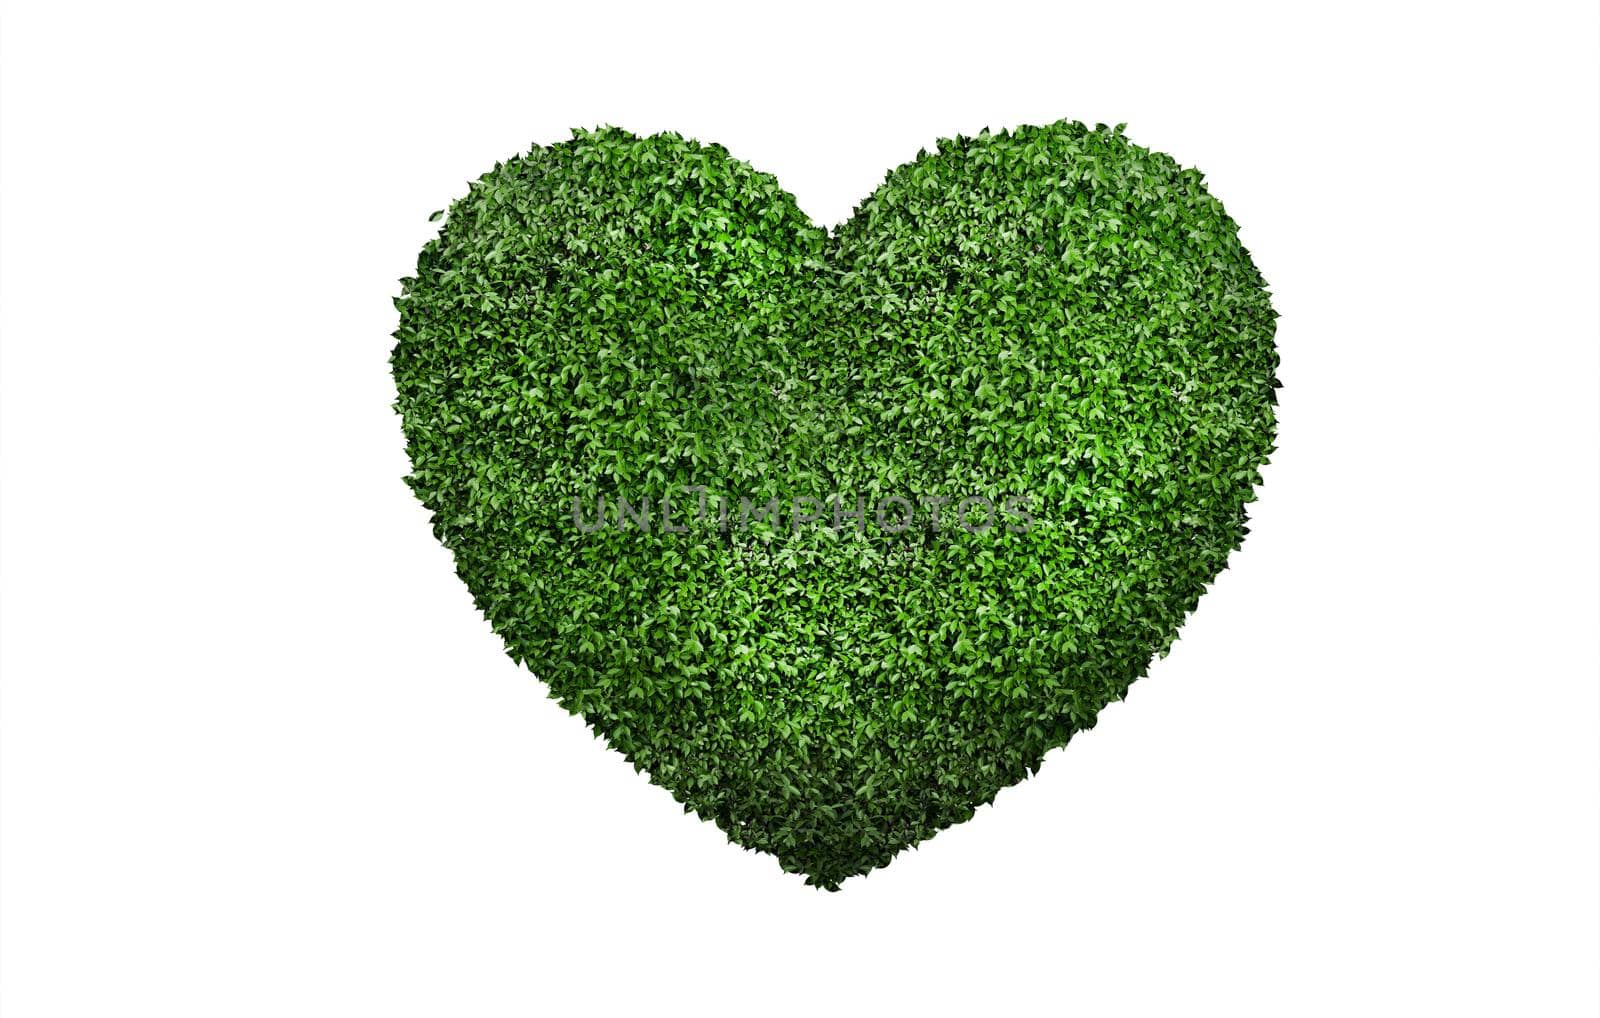 Heart shaped green leaves isolated white background.